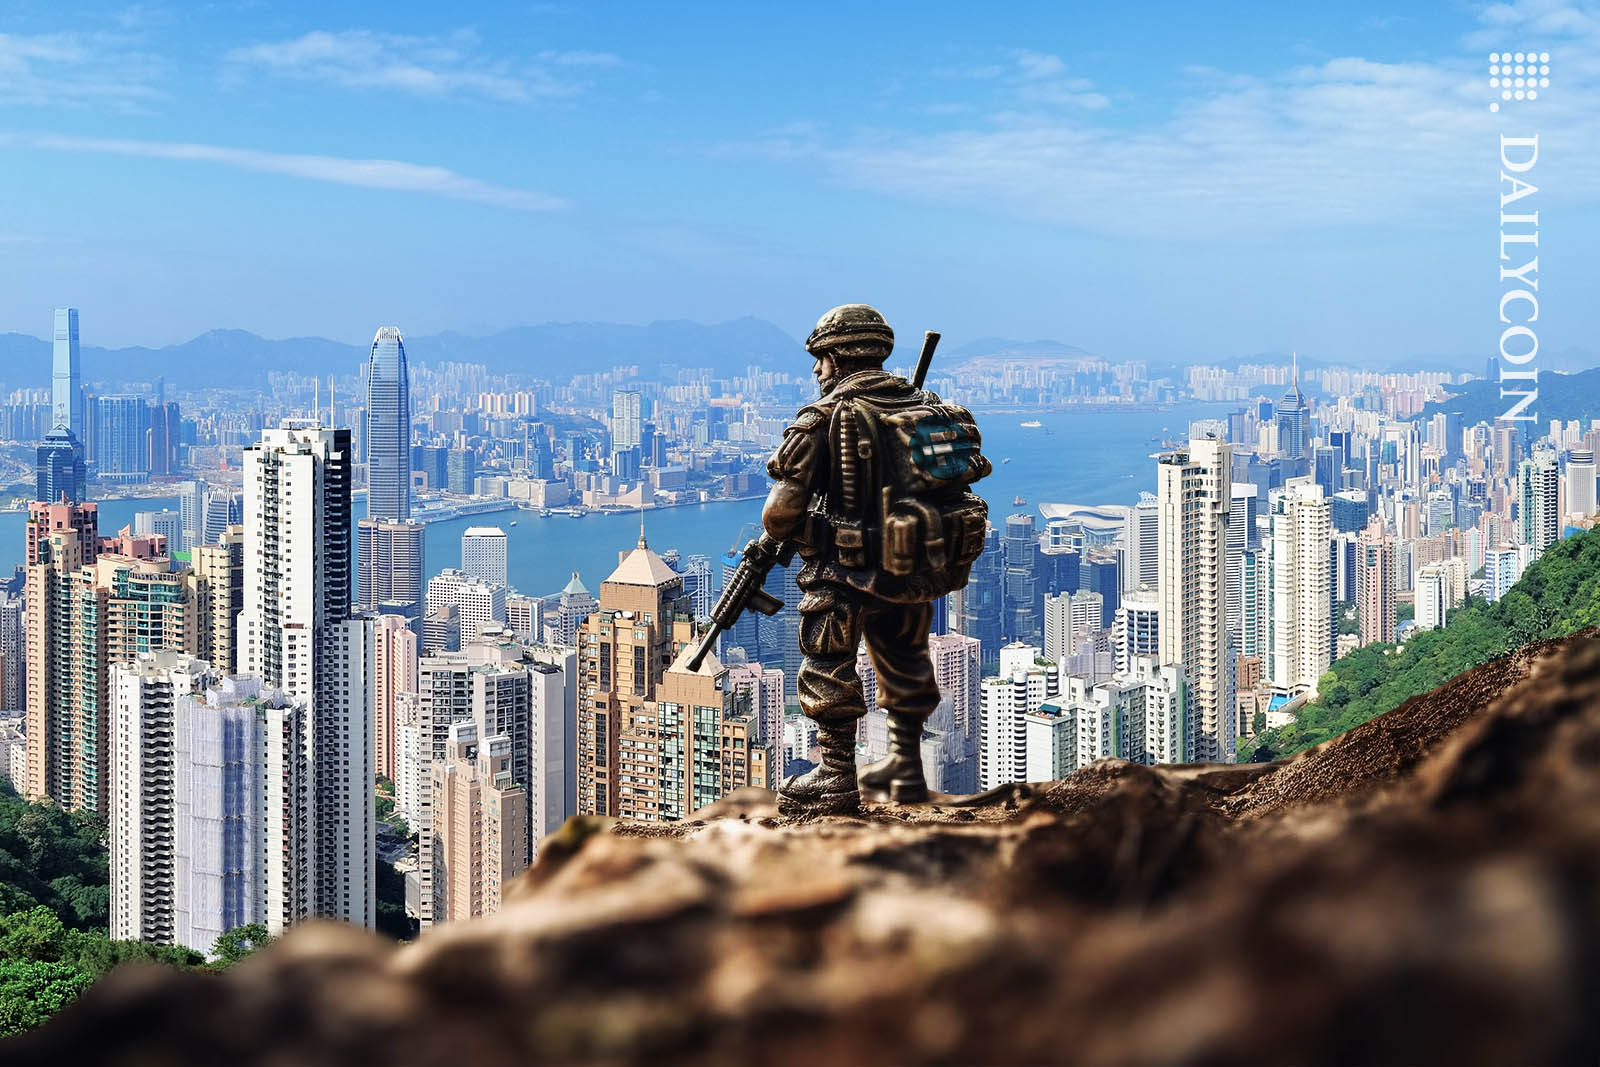 FTX toy soldier looking over Hong Kong from a viewpoint on a mountain, ready for attack.